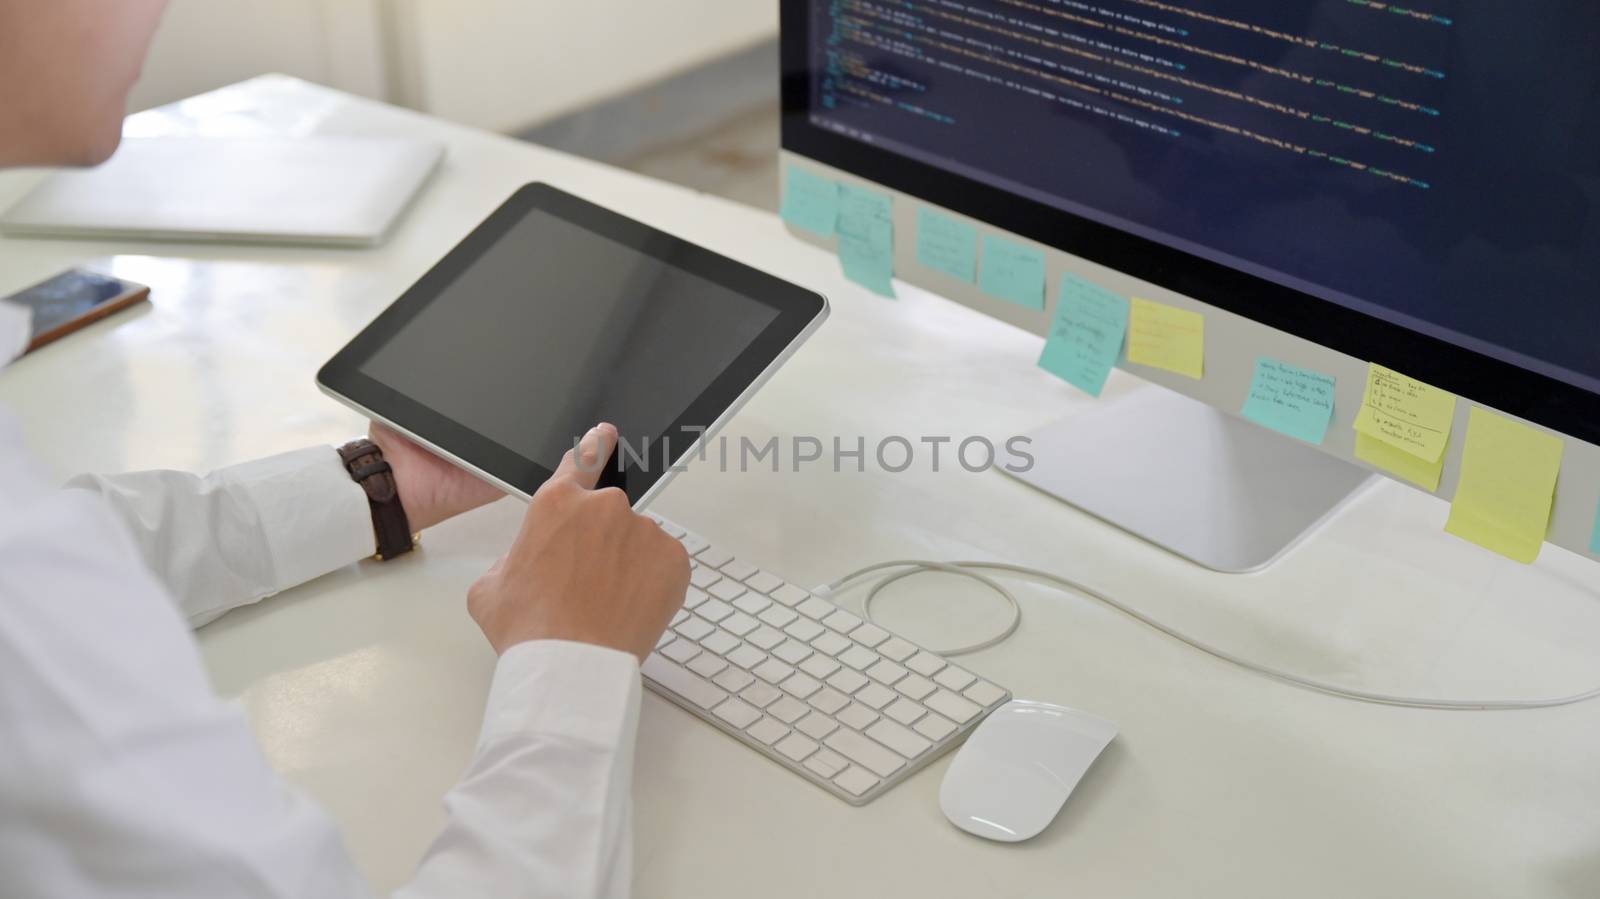 A programmer men using a tablet in his hand with a computer screen on his desk.